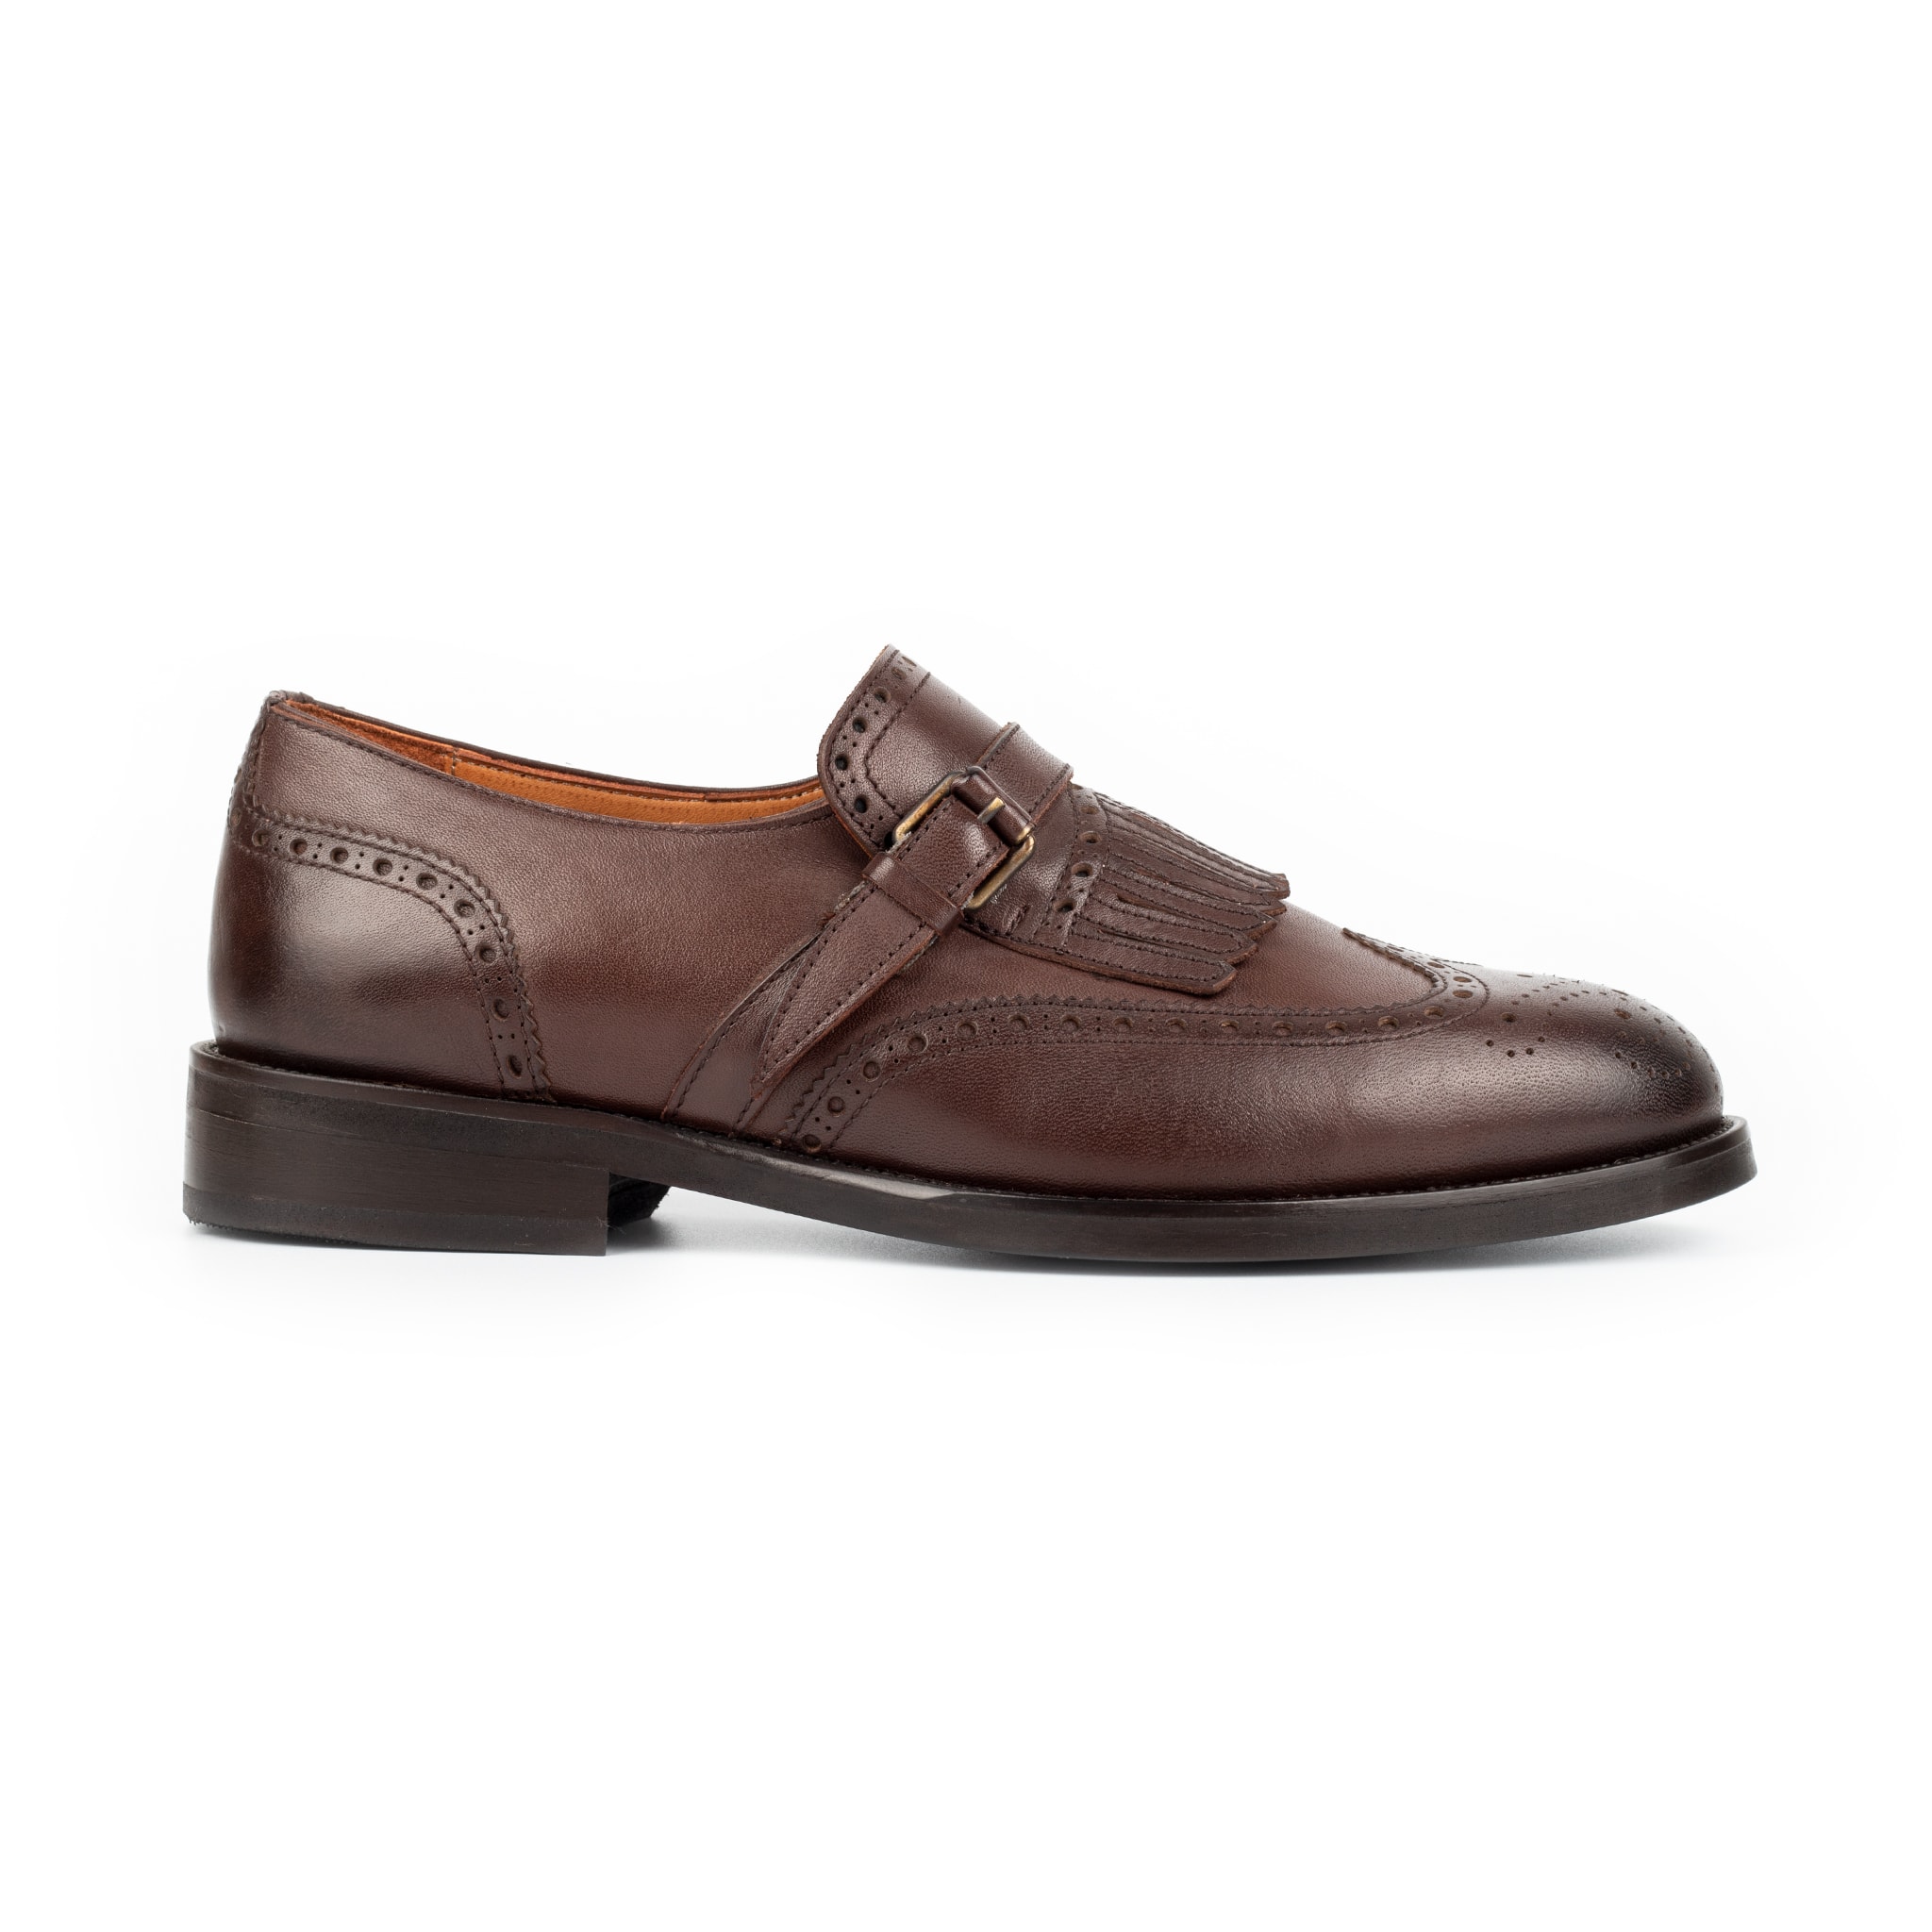 MAUNA | BROWN | Zerbay Handcrafted Leather Shoes